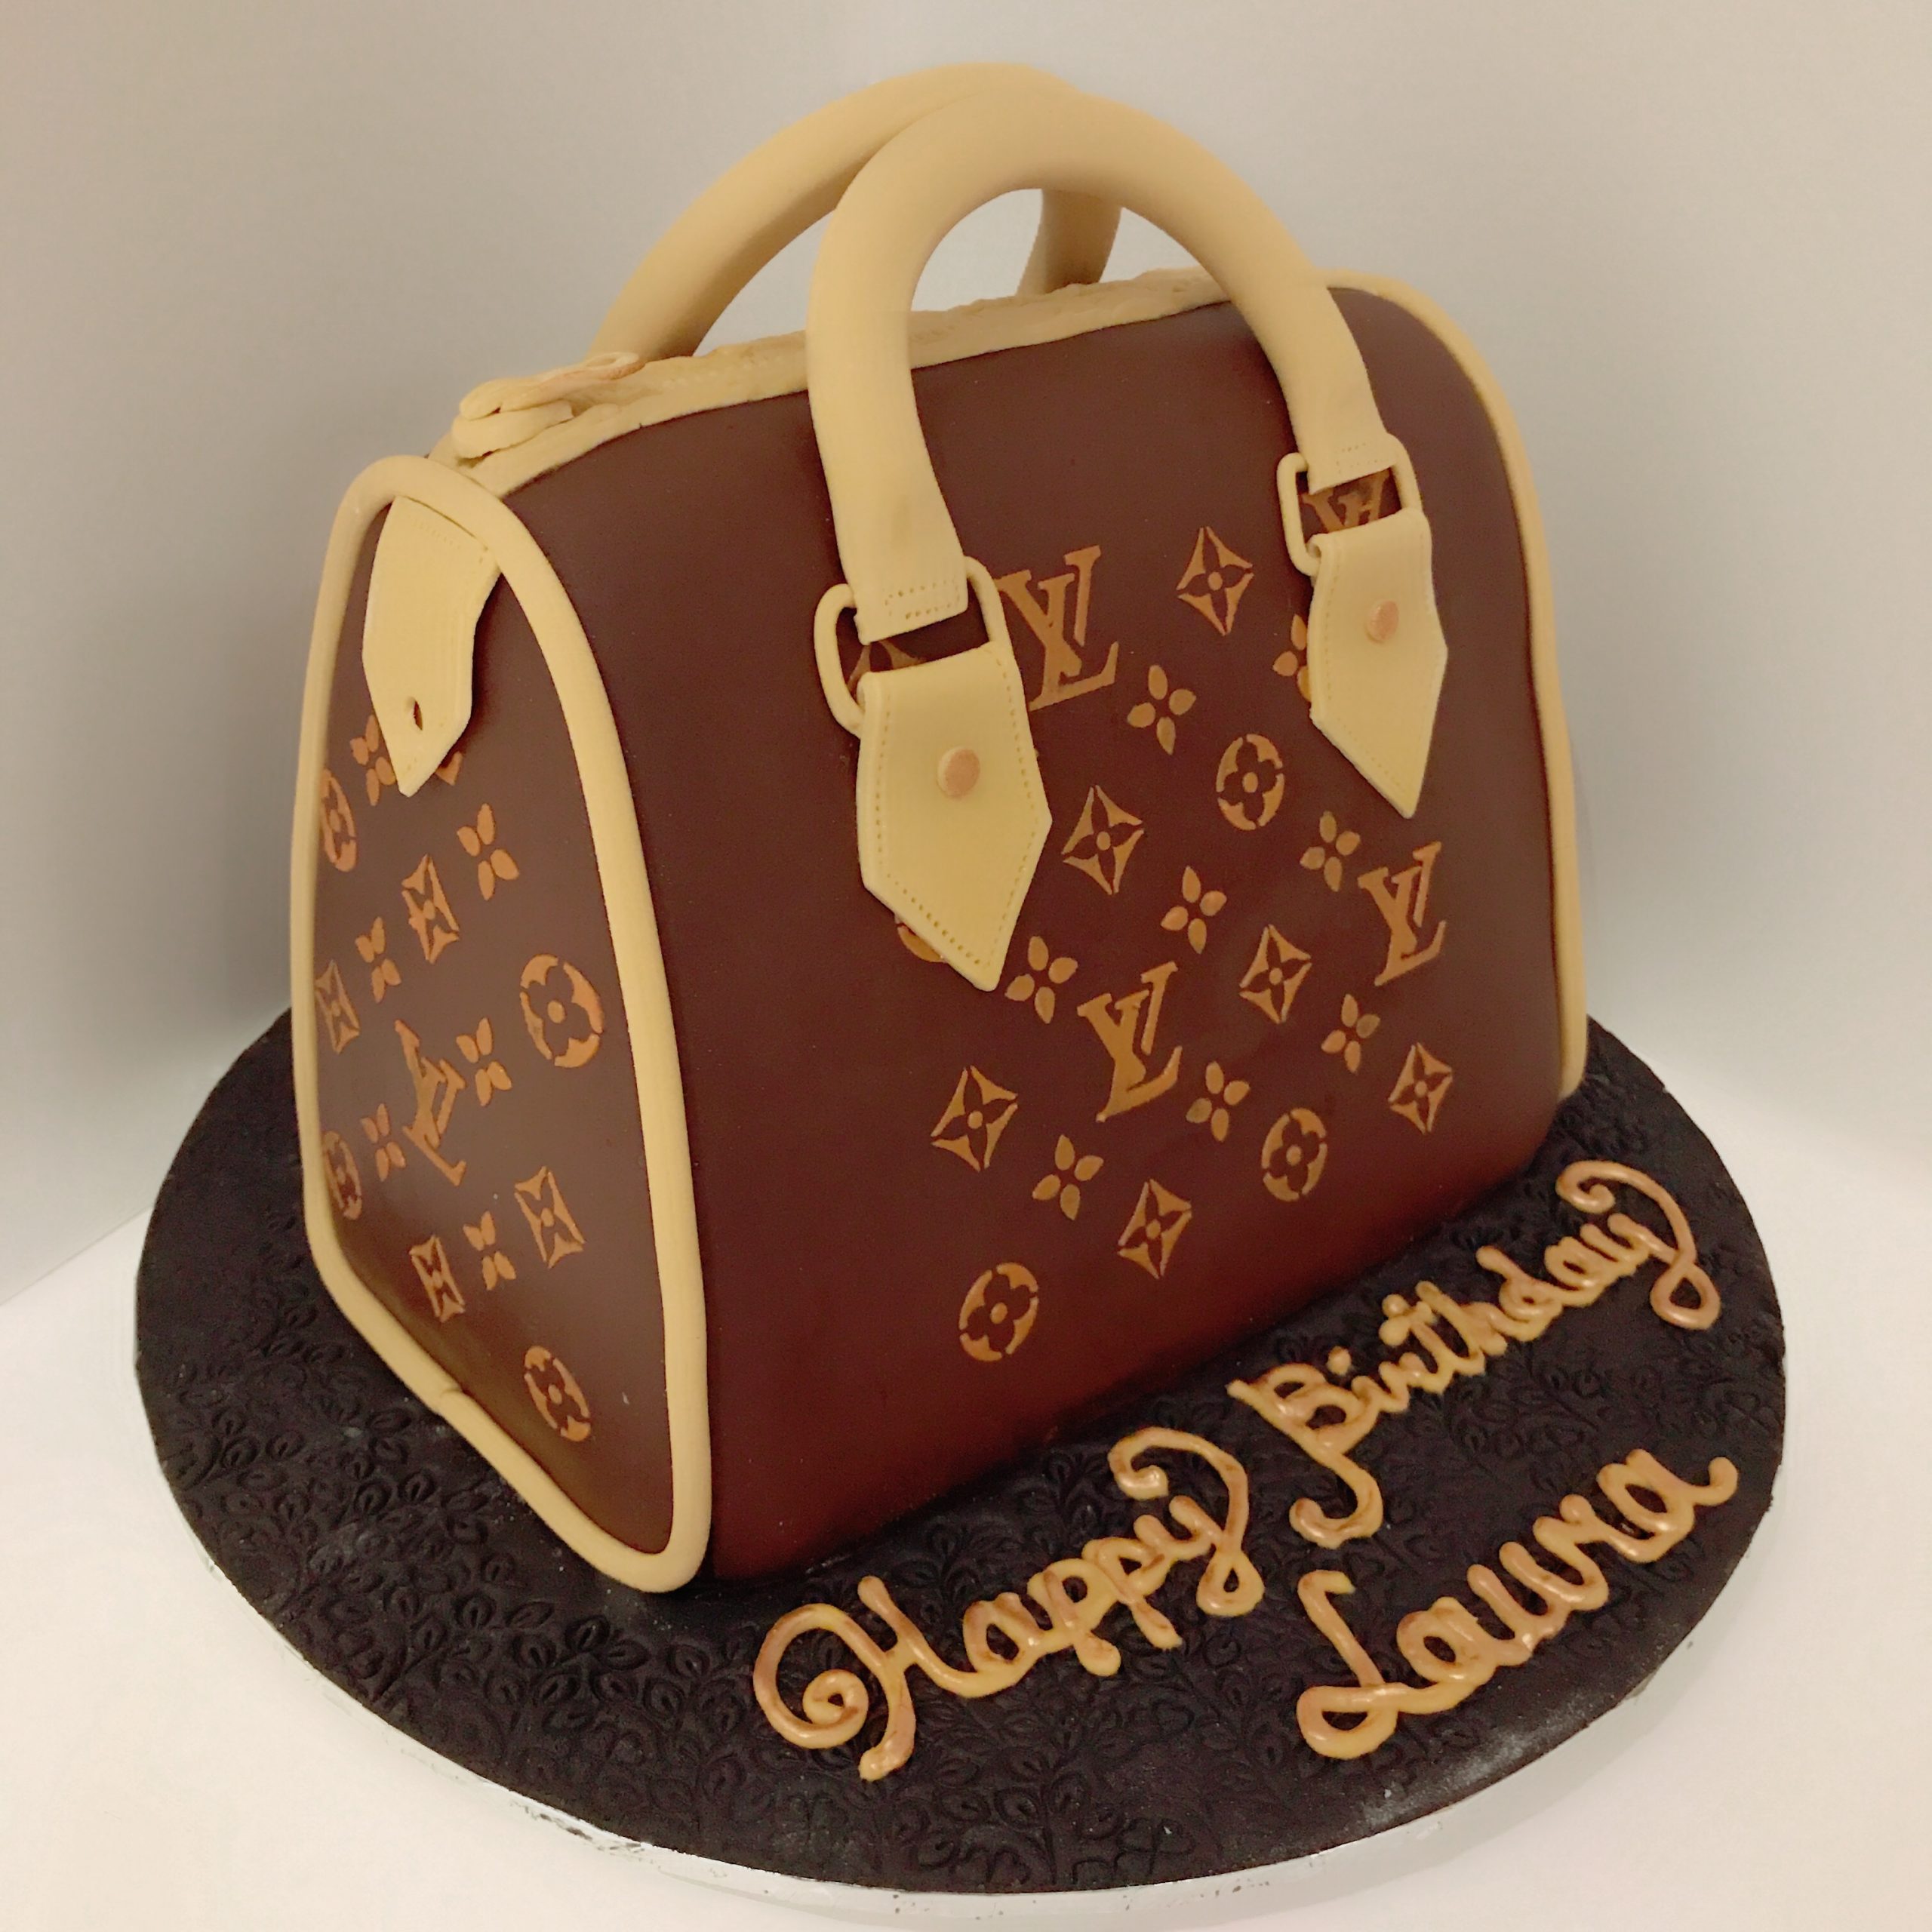 LV Supreme Duffle Bag Cake! I just finished it! 😍 : r/CAKEWIN